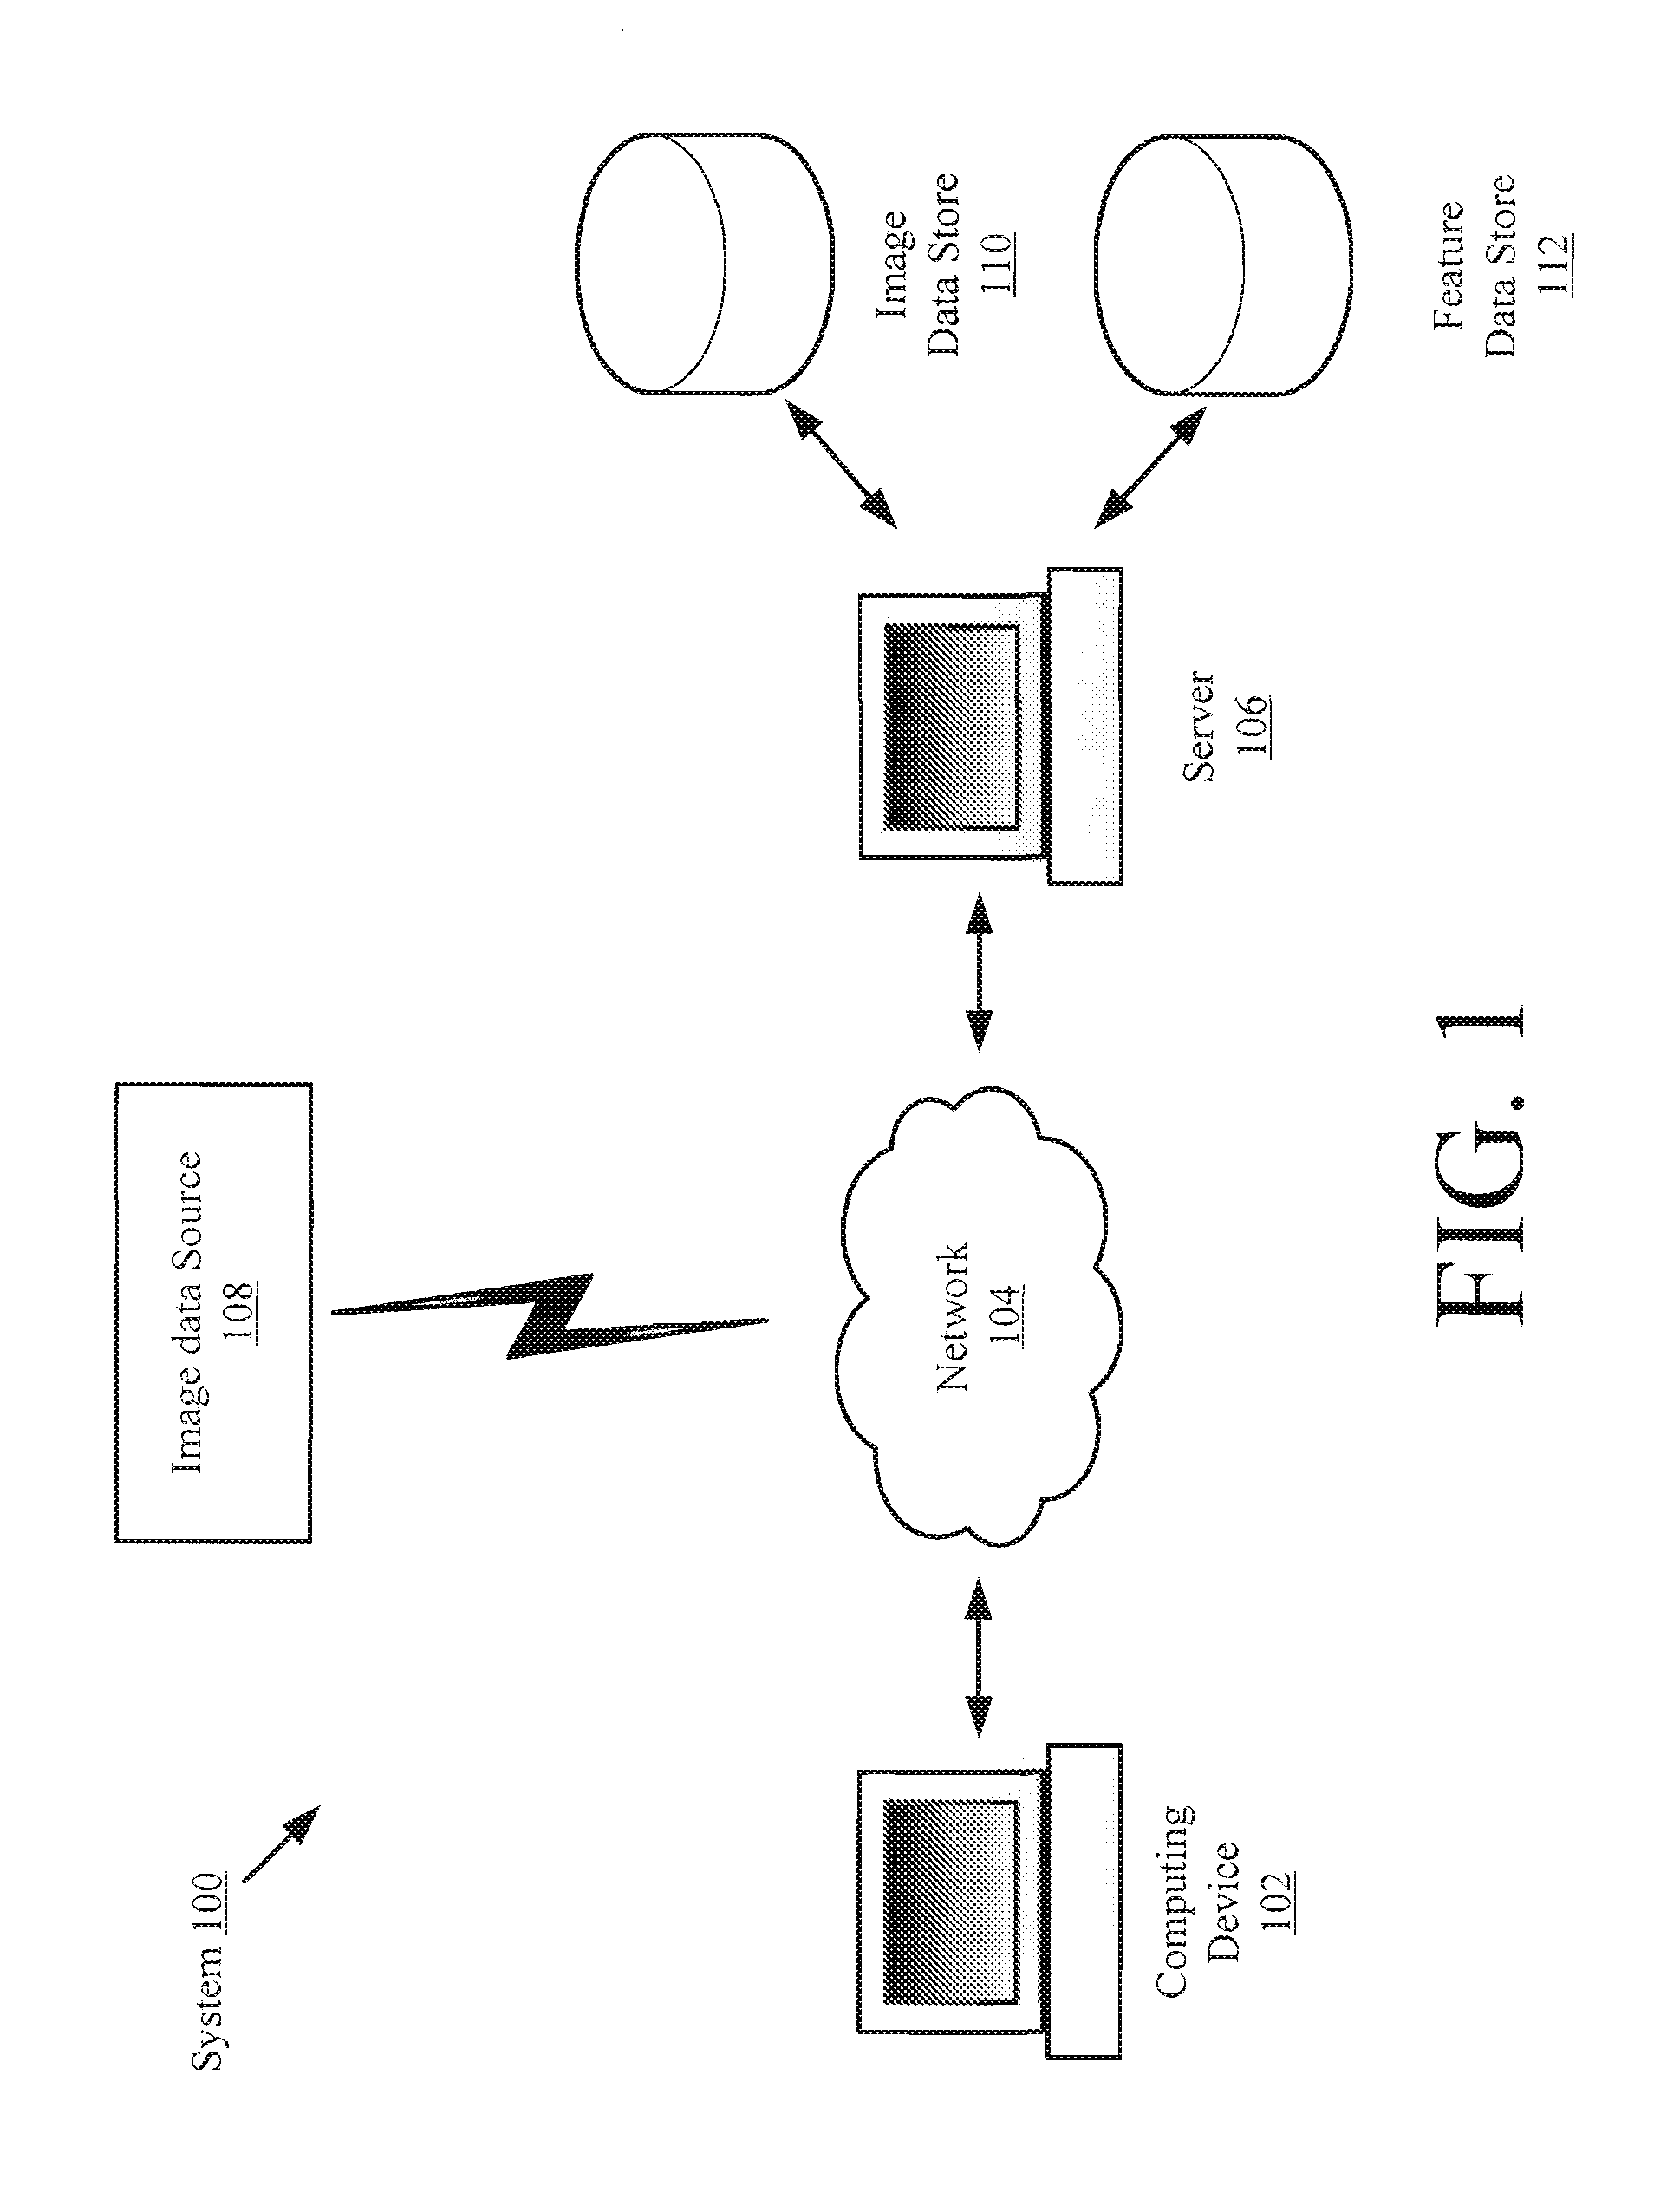 Systems and methods for efficient spatial feature analysis